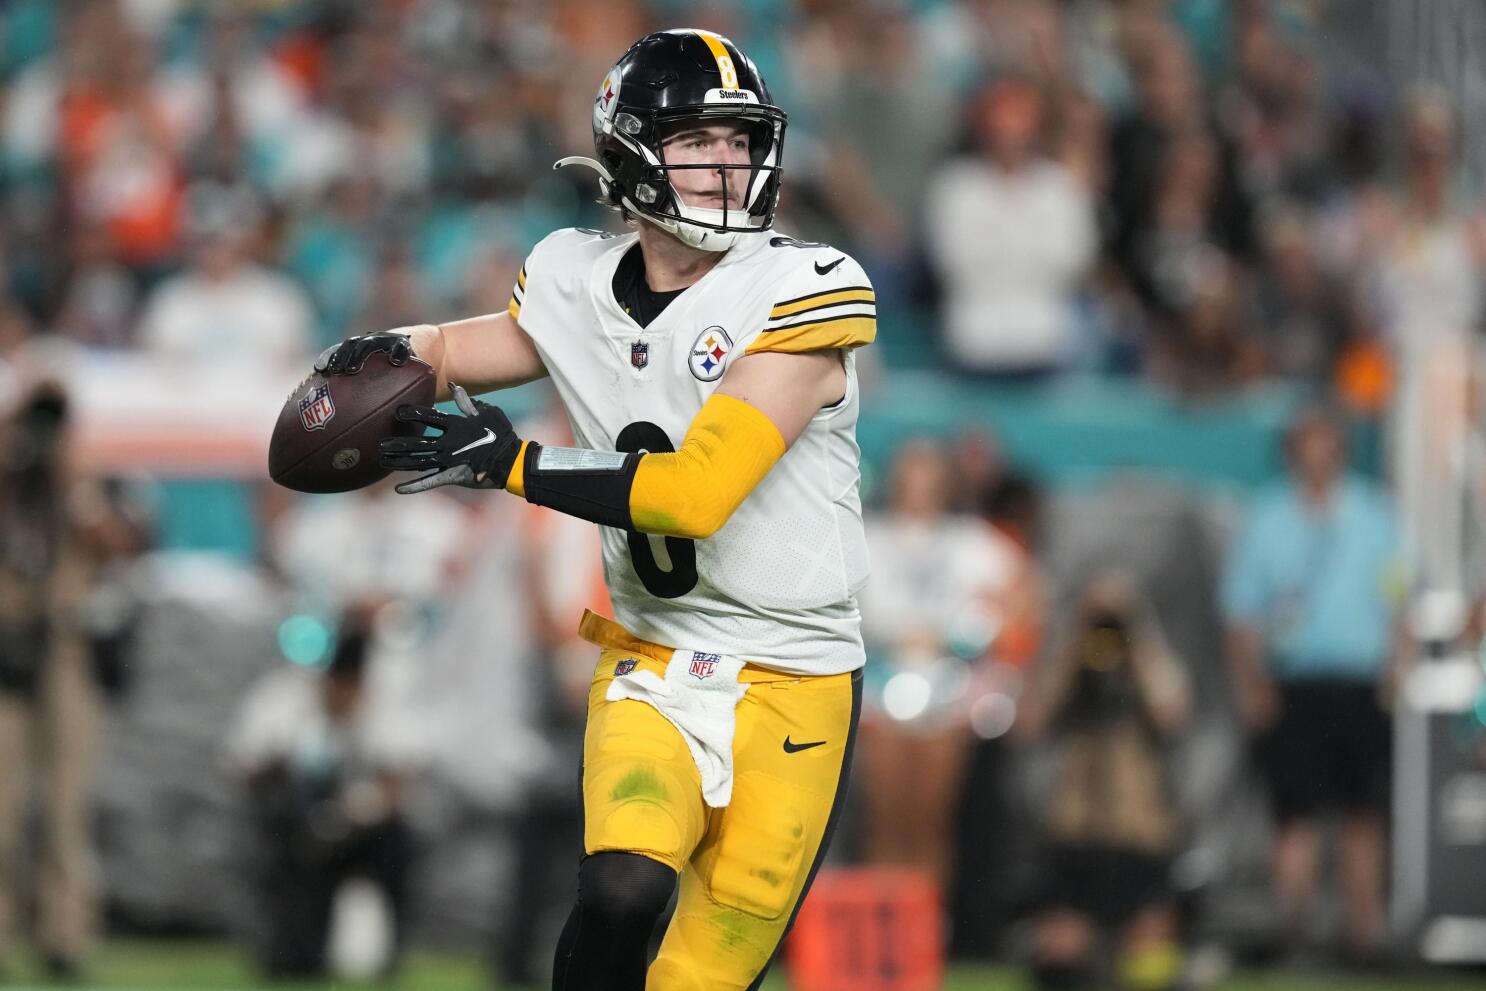 The clock may already be ticking on Steelers QB Kenny Pickett